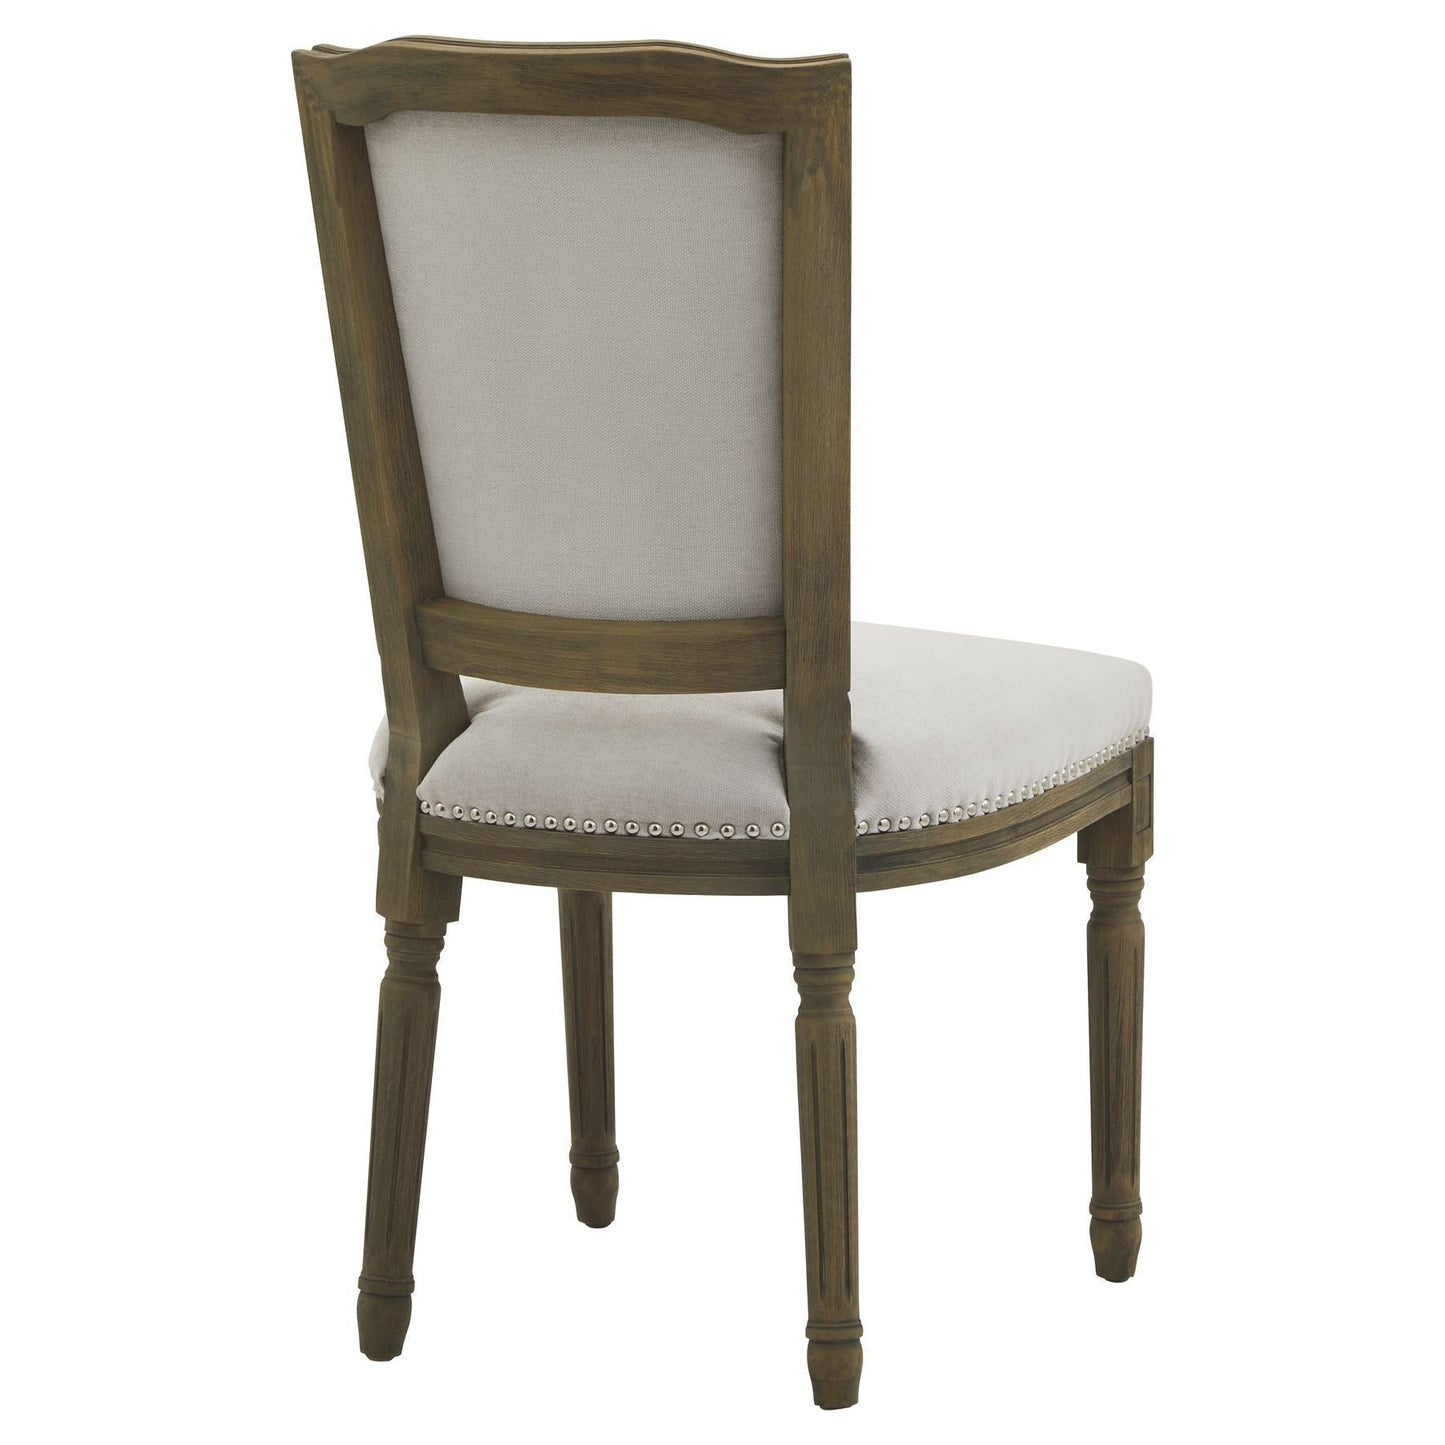 Ripley Grey Dining Chair - Ashton and Finch